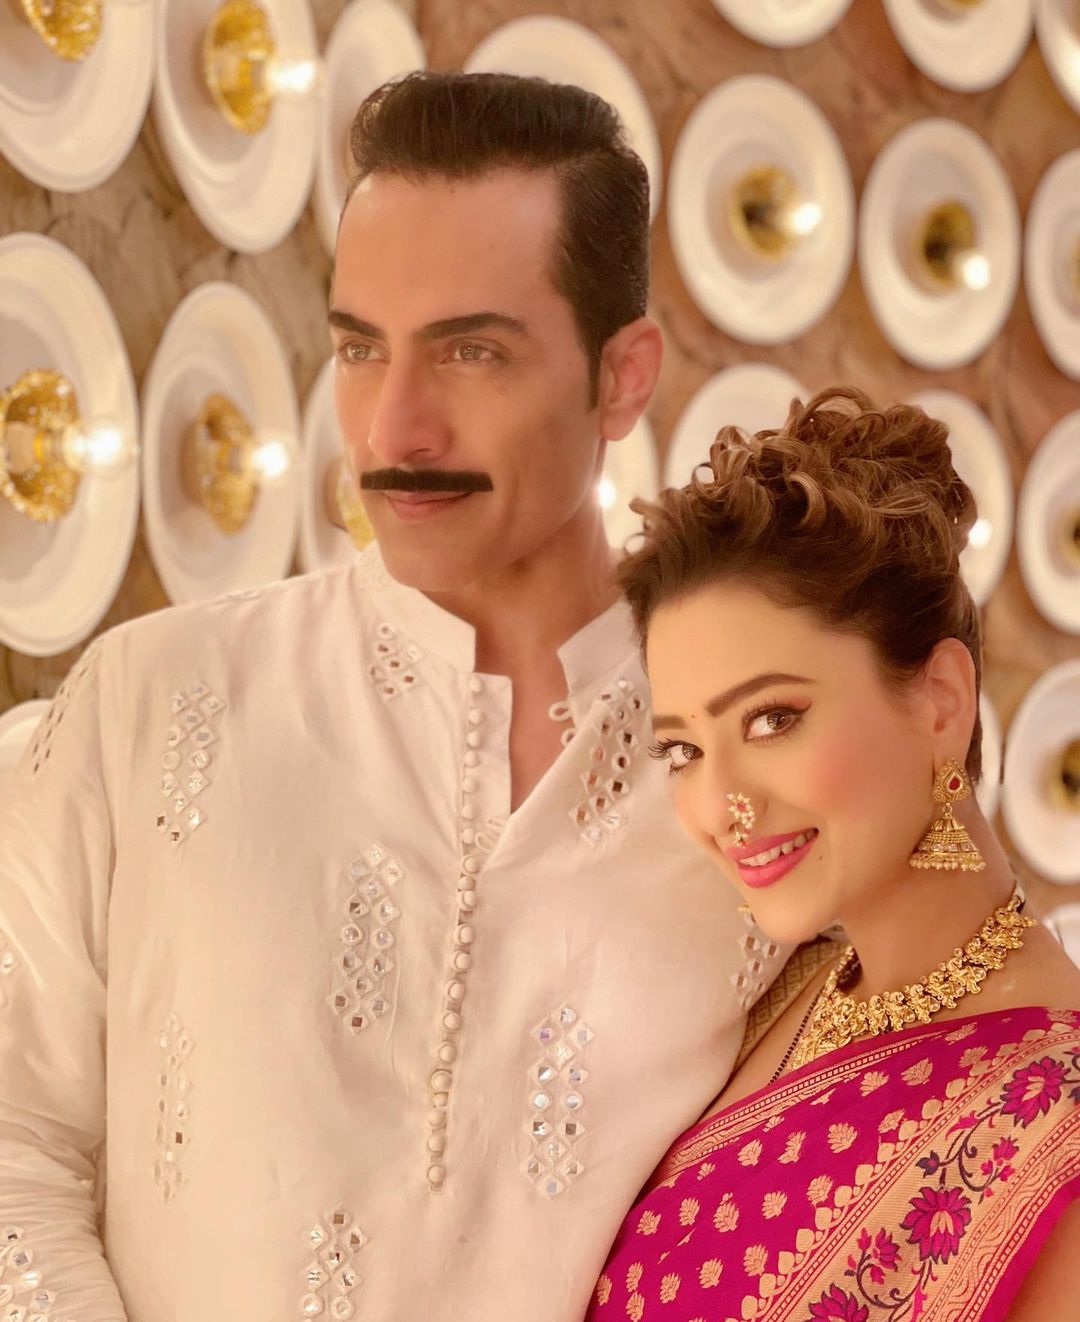 Sudhanshu Pandey (Film Actor)- Wife, Serials, Age, Height, Net Worth, Biography